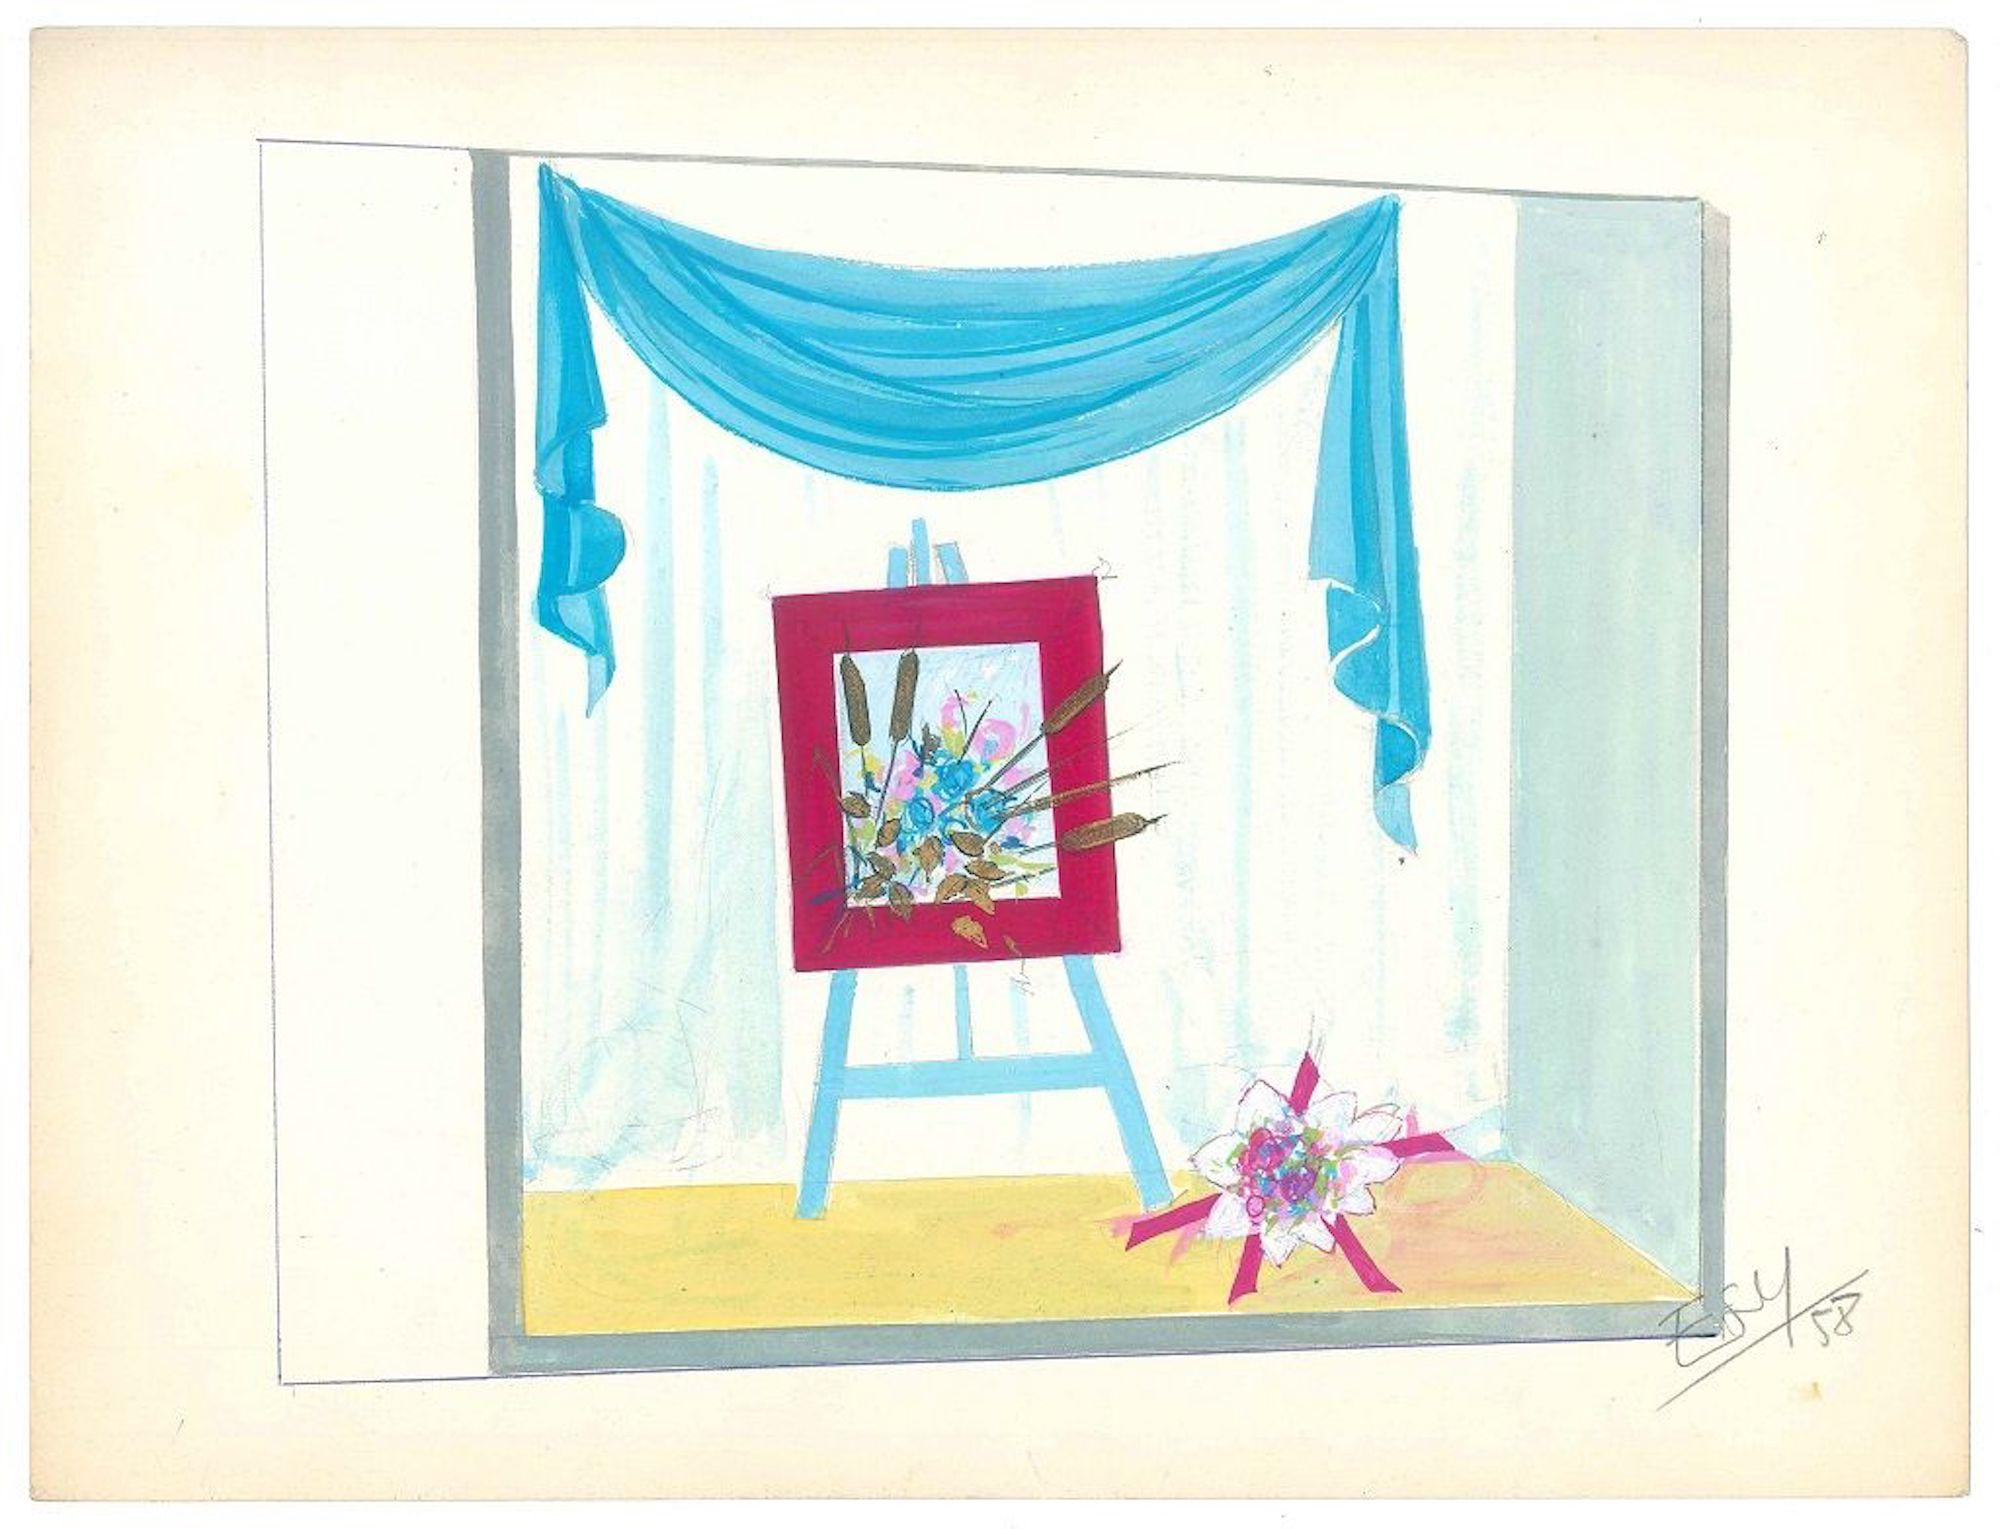 Image dimensions: 19.5 x 24 cm.

The Atelier is an original artwork realized in by Esy Beluzzi in 1958.

Original tempera on paper. 

Hand-signed and dated by the artist in pencil on the lower right corner: Esy 1958.

Mint conditions. 

Colorful